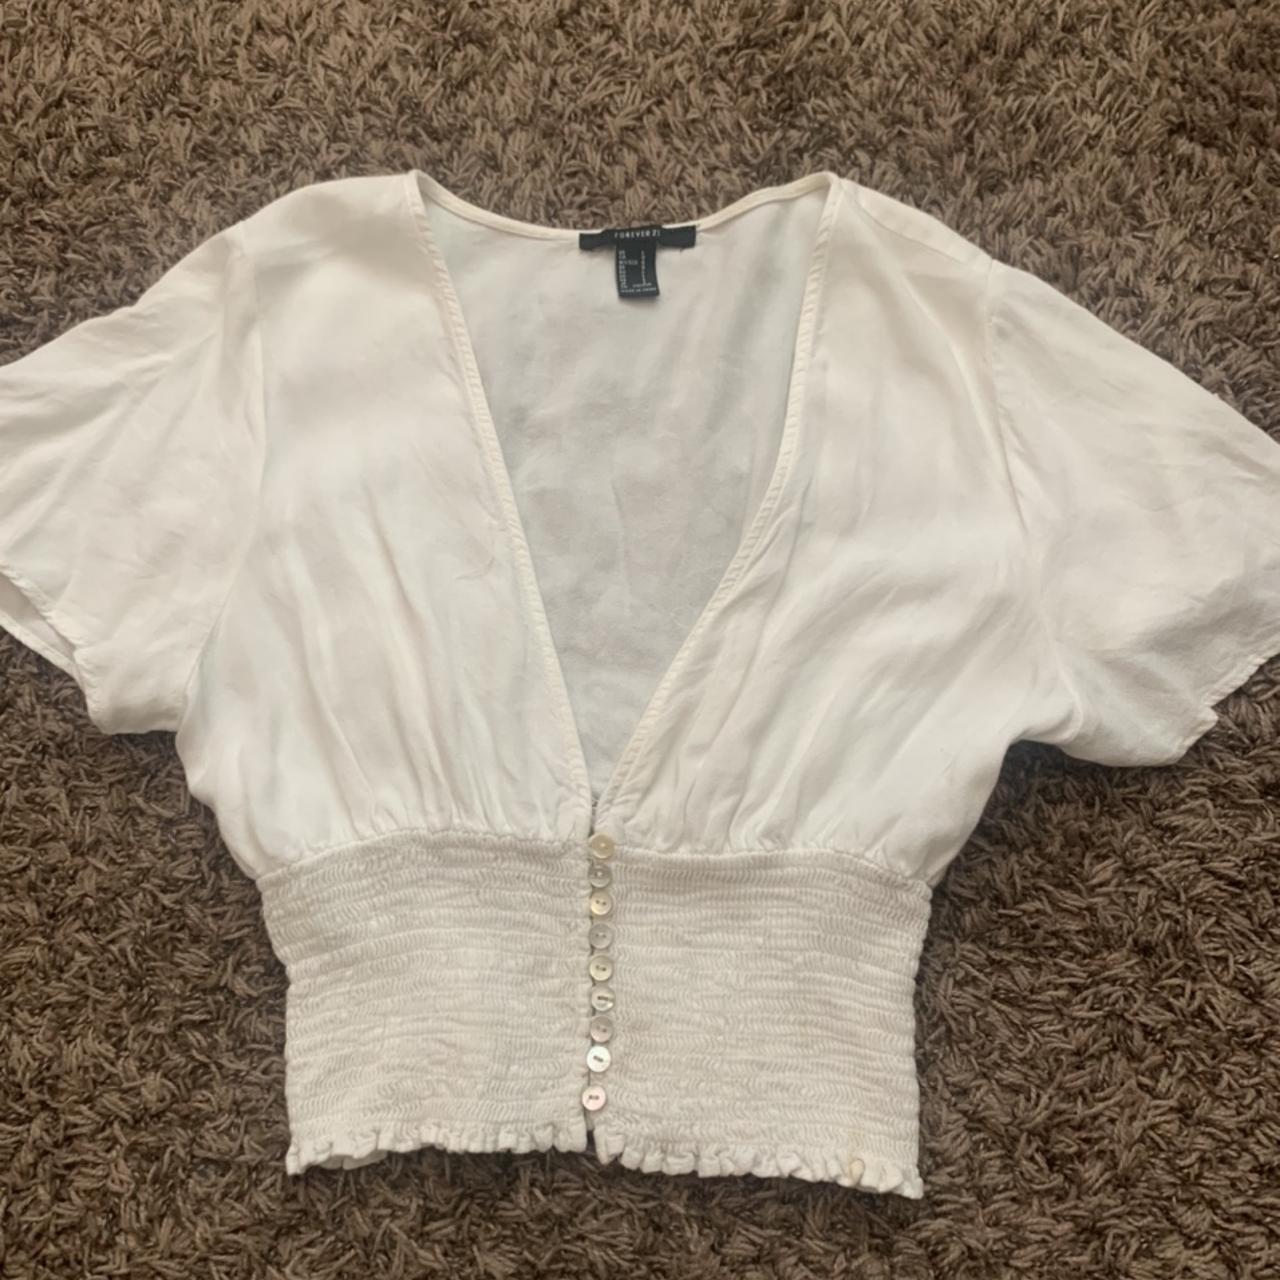 Forever 21 peasant blouse! Super cute and comfy Can... - Depop